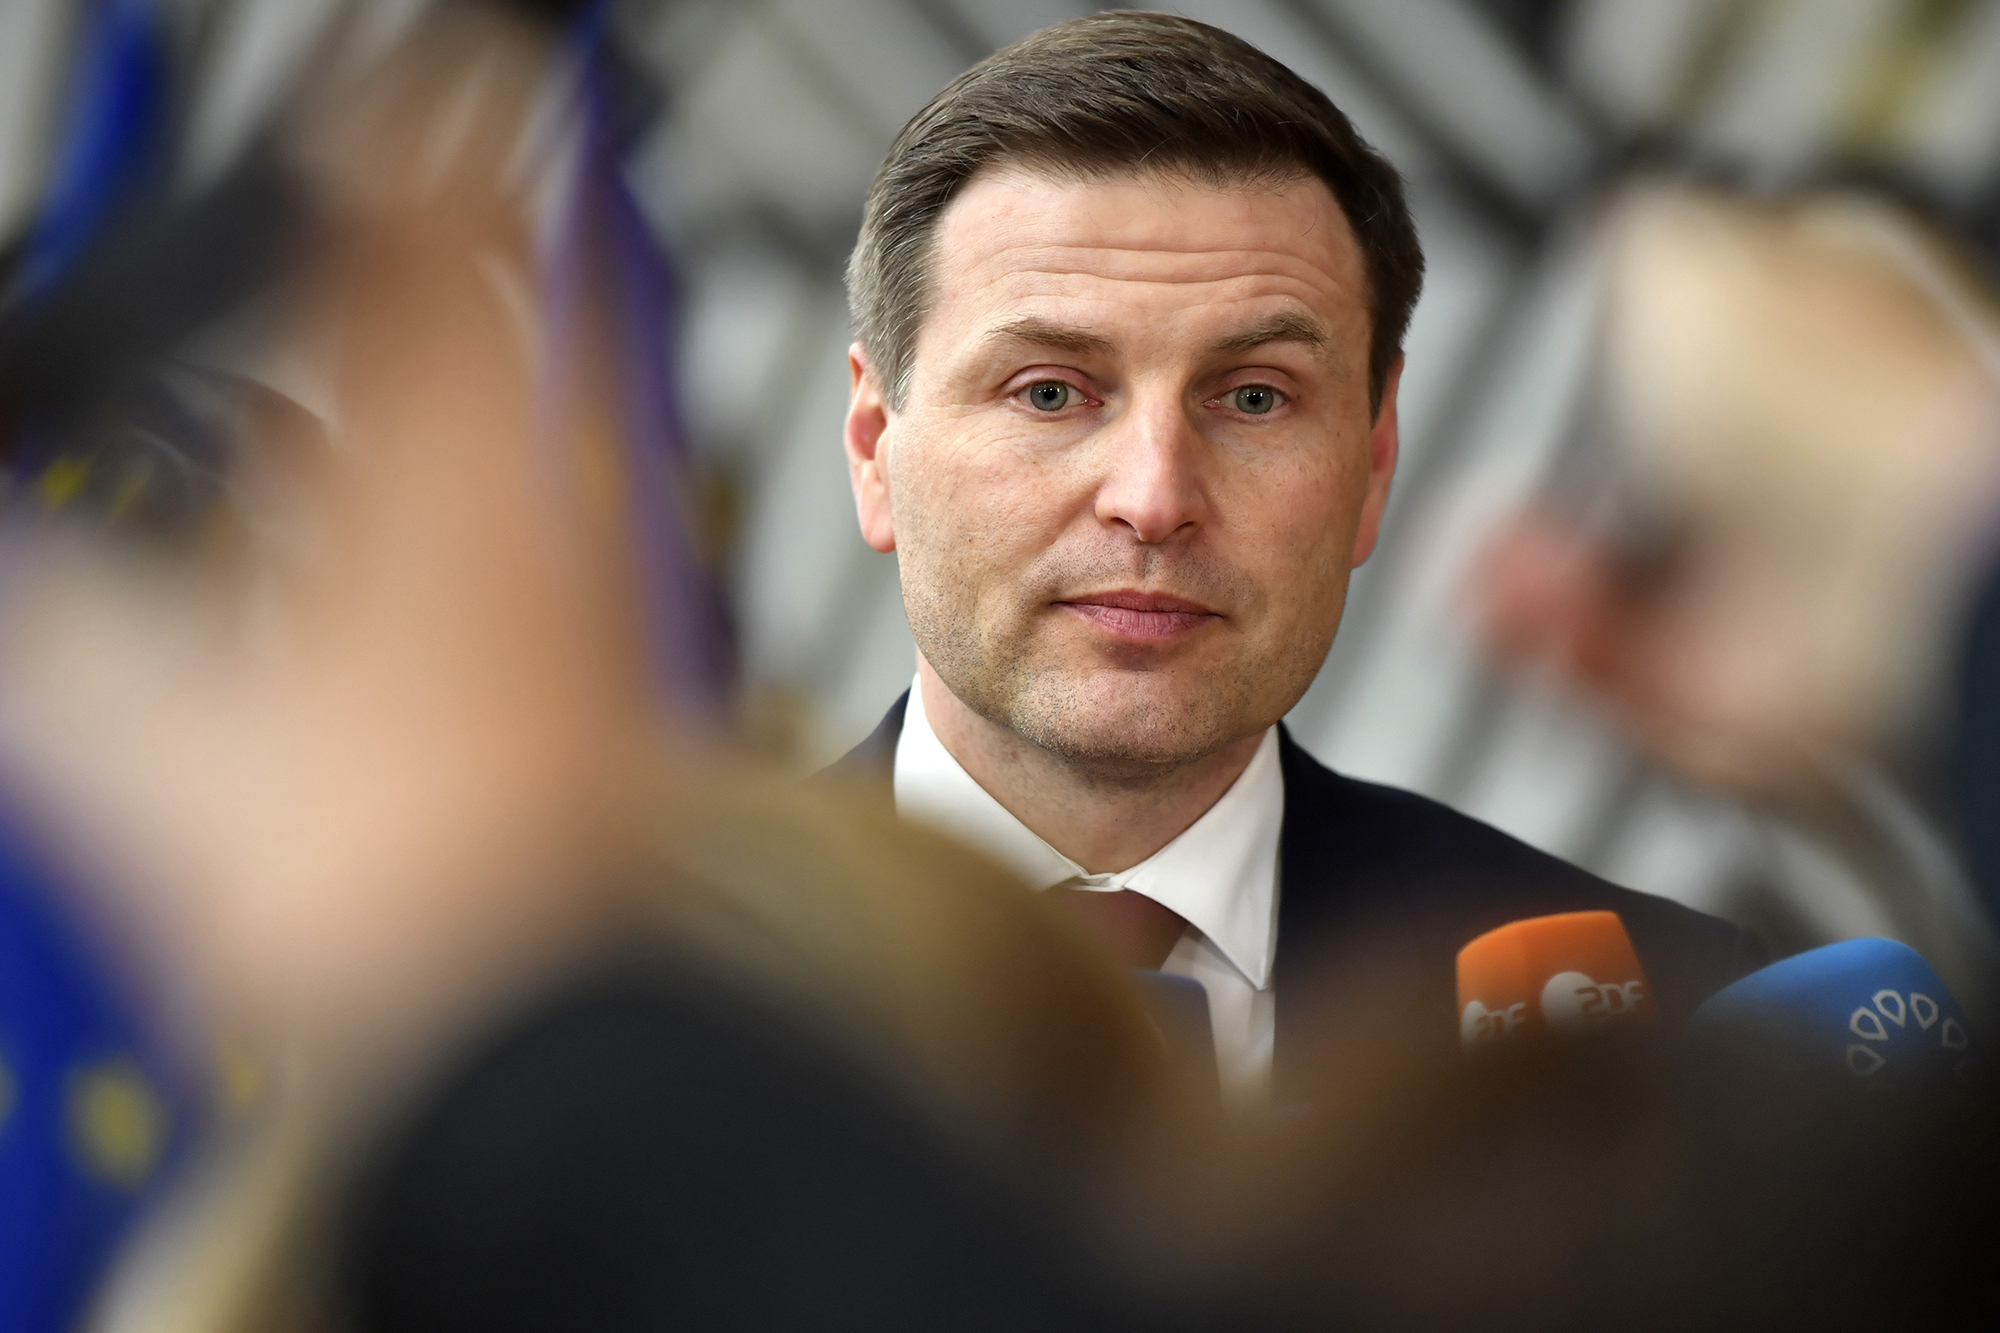 Estonia's Defense Minister Hanno Pevkur speaks with the media as he arrives for a meeting of EU foreign and defense ministers at the European Council building in Brussels, Belgium, on March 20.